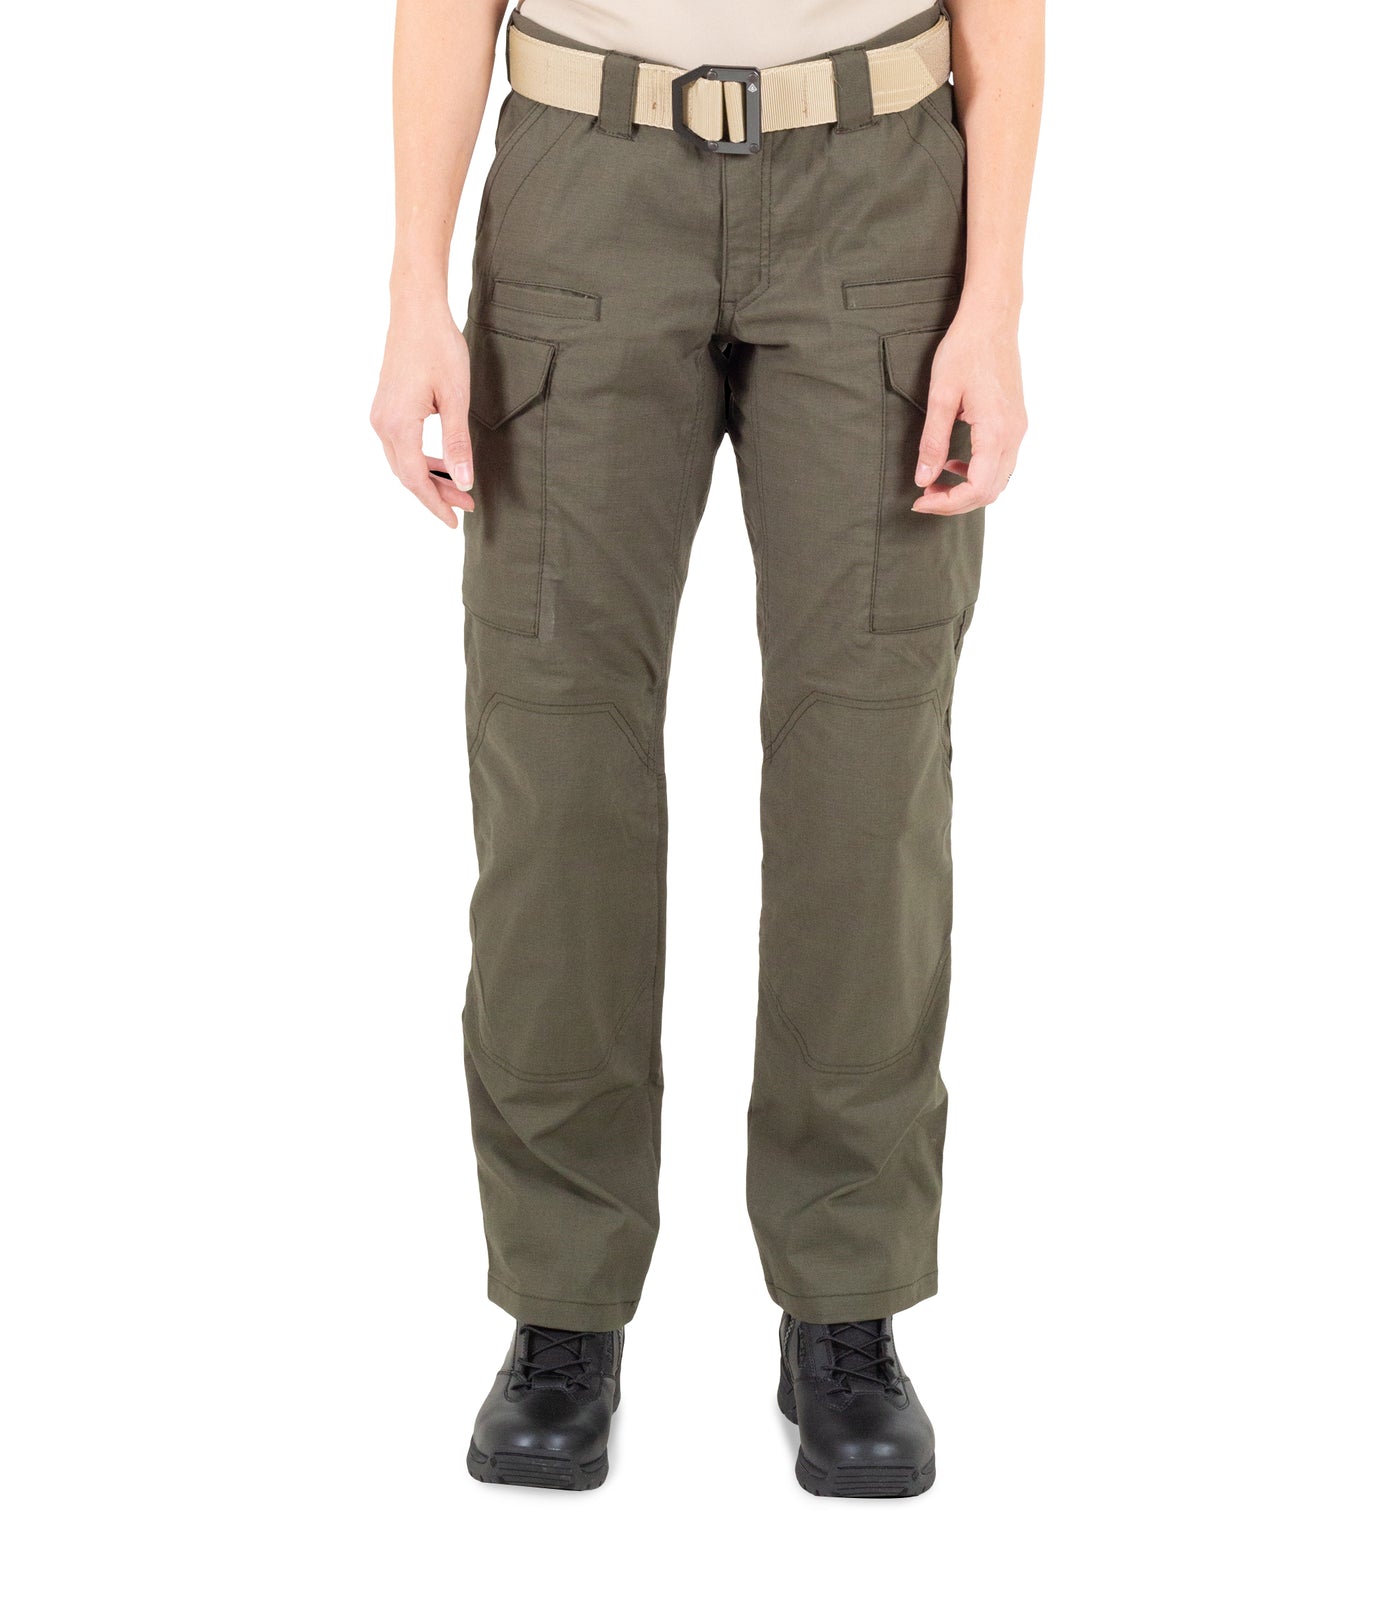 Front of Women's V2 Tactical Pants in OD Green